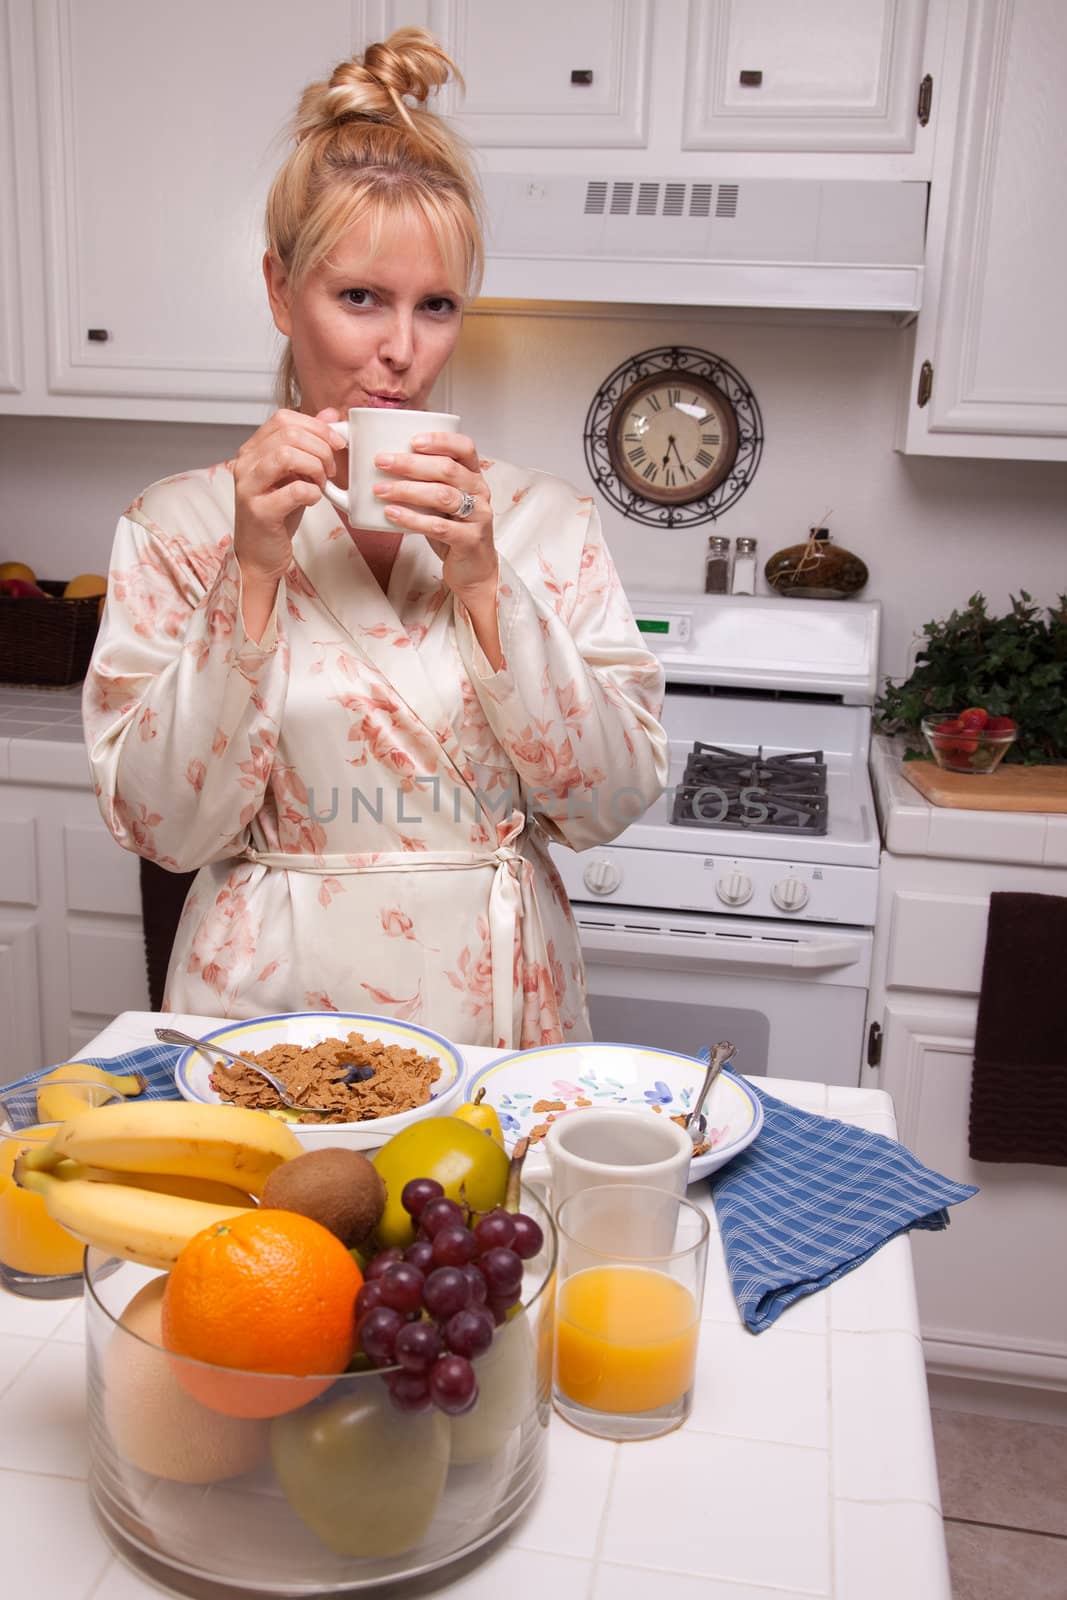 Attractive Woman In Kitchen with Fruit, Coffee, Orange Juice and Breakfast Bowls.